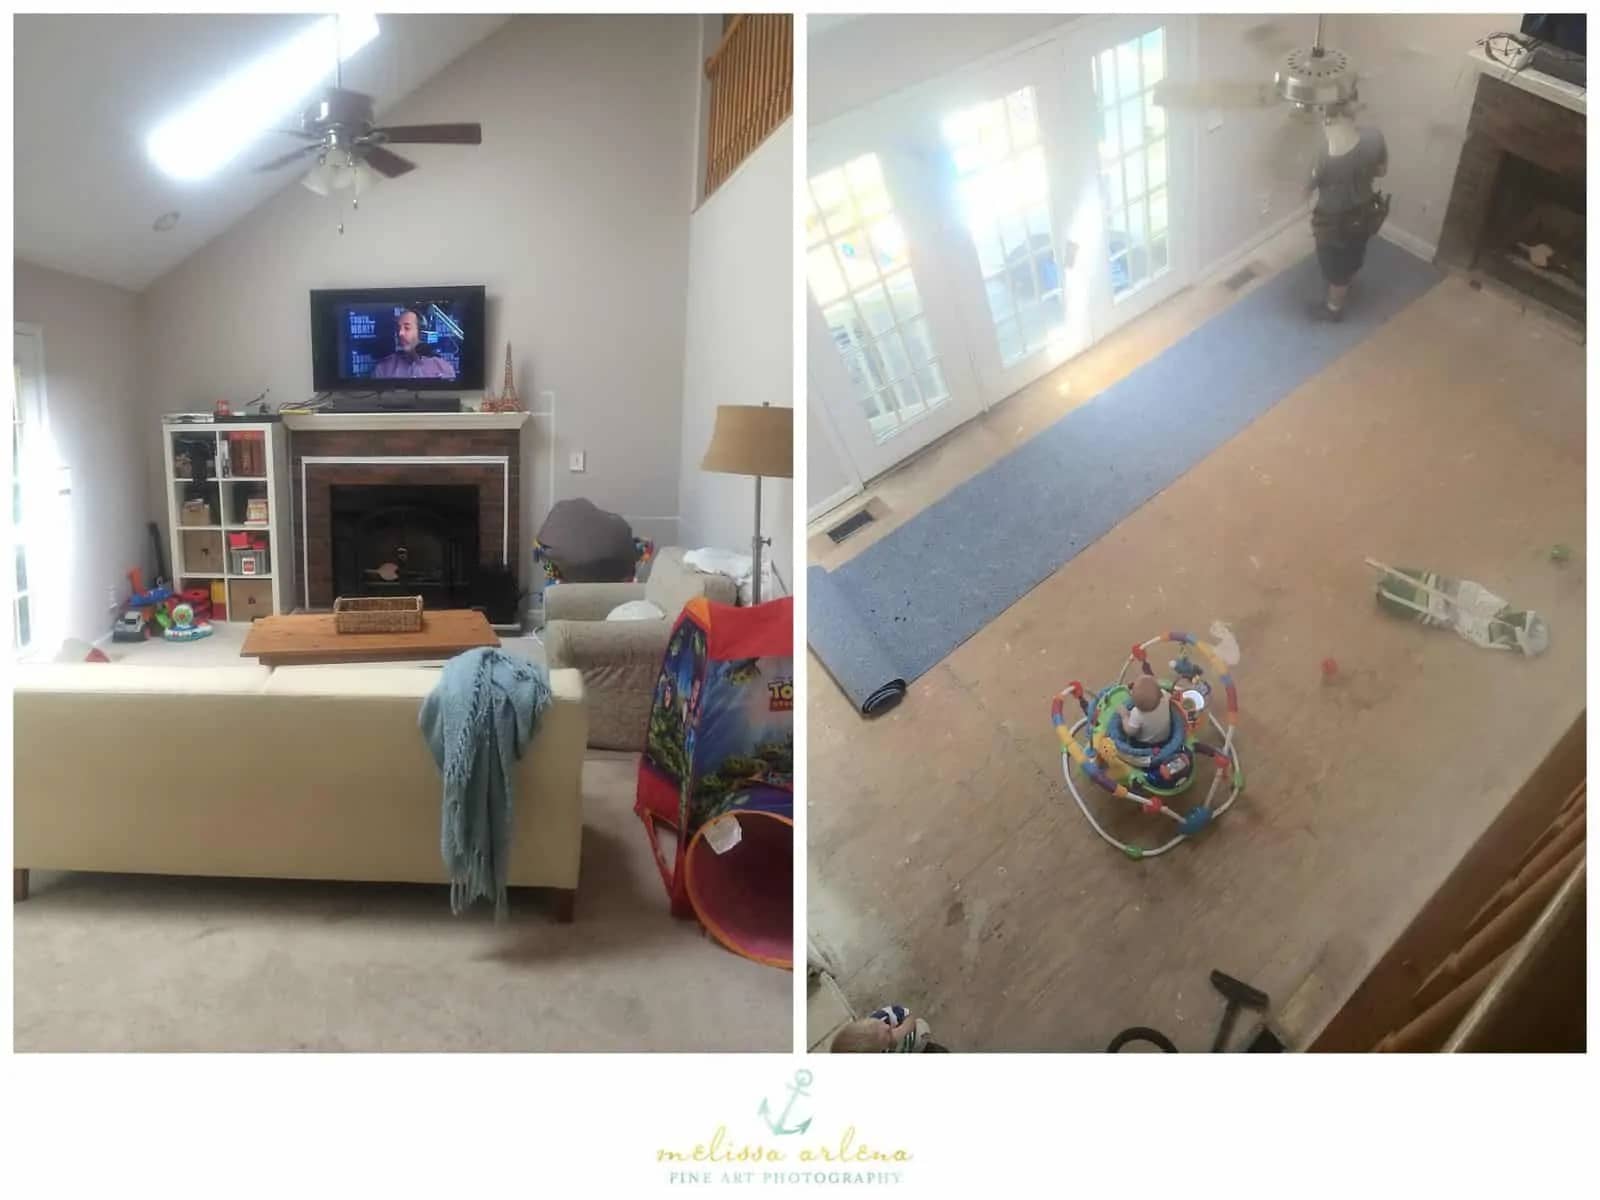 Pre-renovation on the left. Cream carpet plus 2 boys with leaky sippy cups and 2 dogs equals NASTY!!! We were so happy to rip that carpet out!